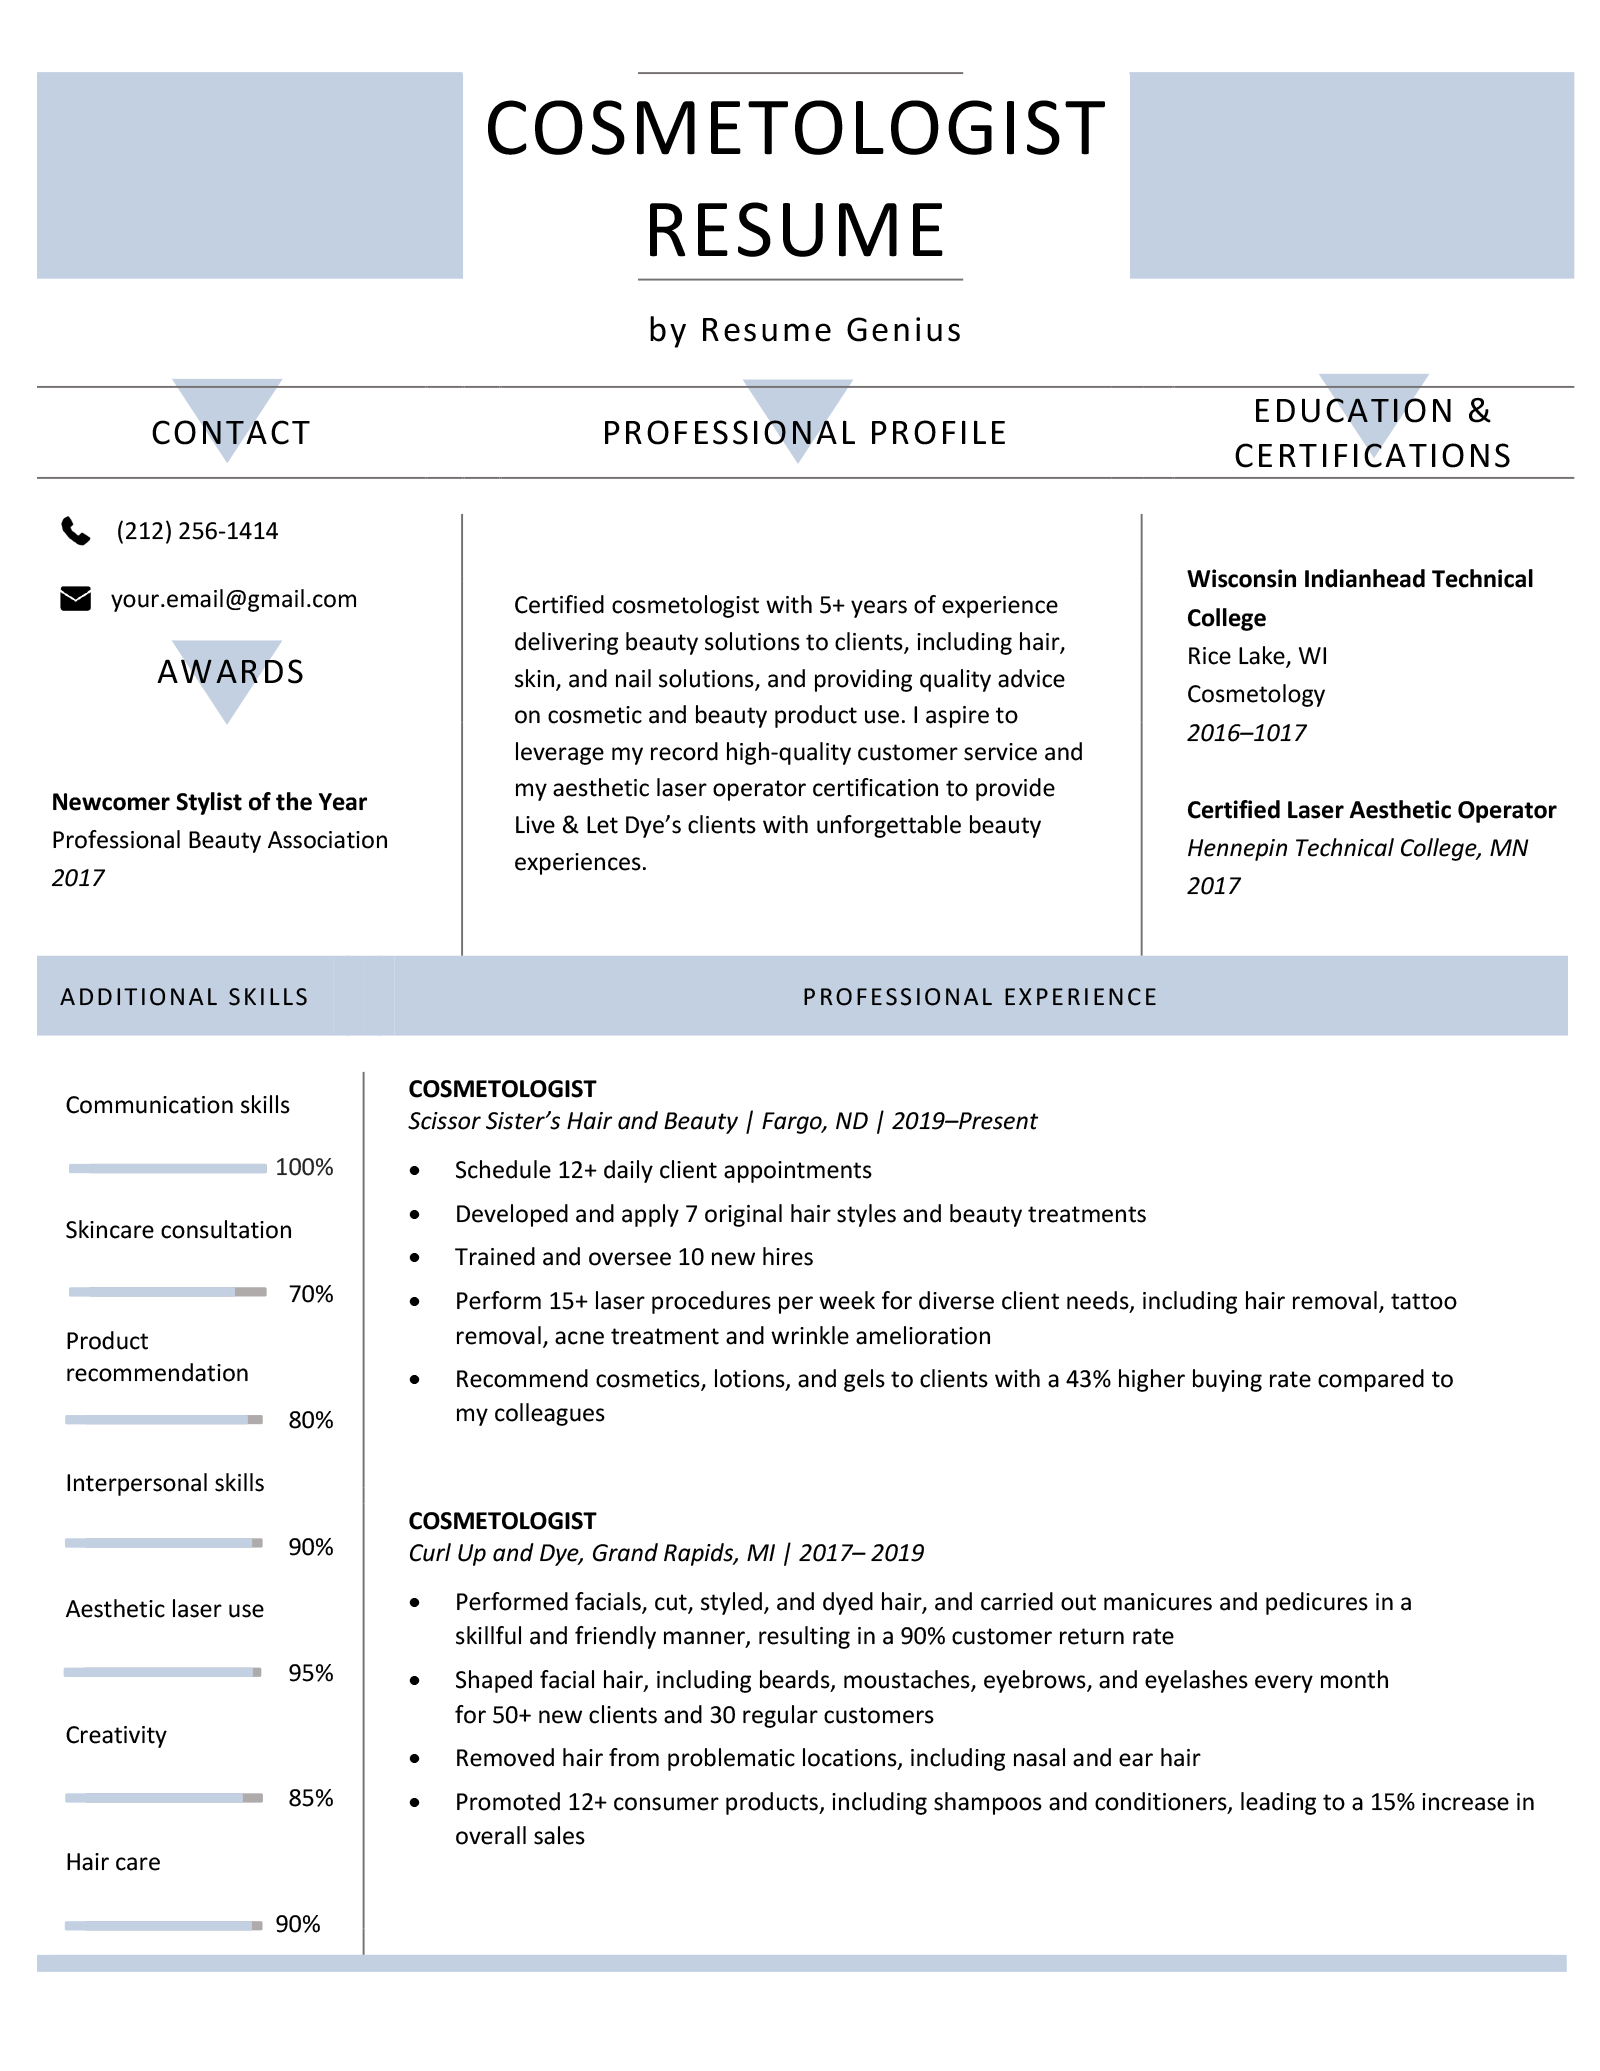 Cosmetologist Resume Example & Writing Guide